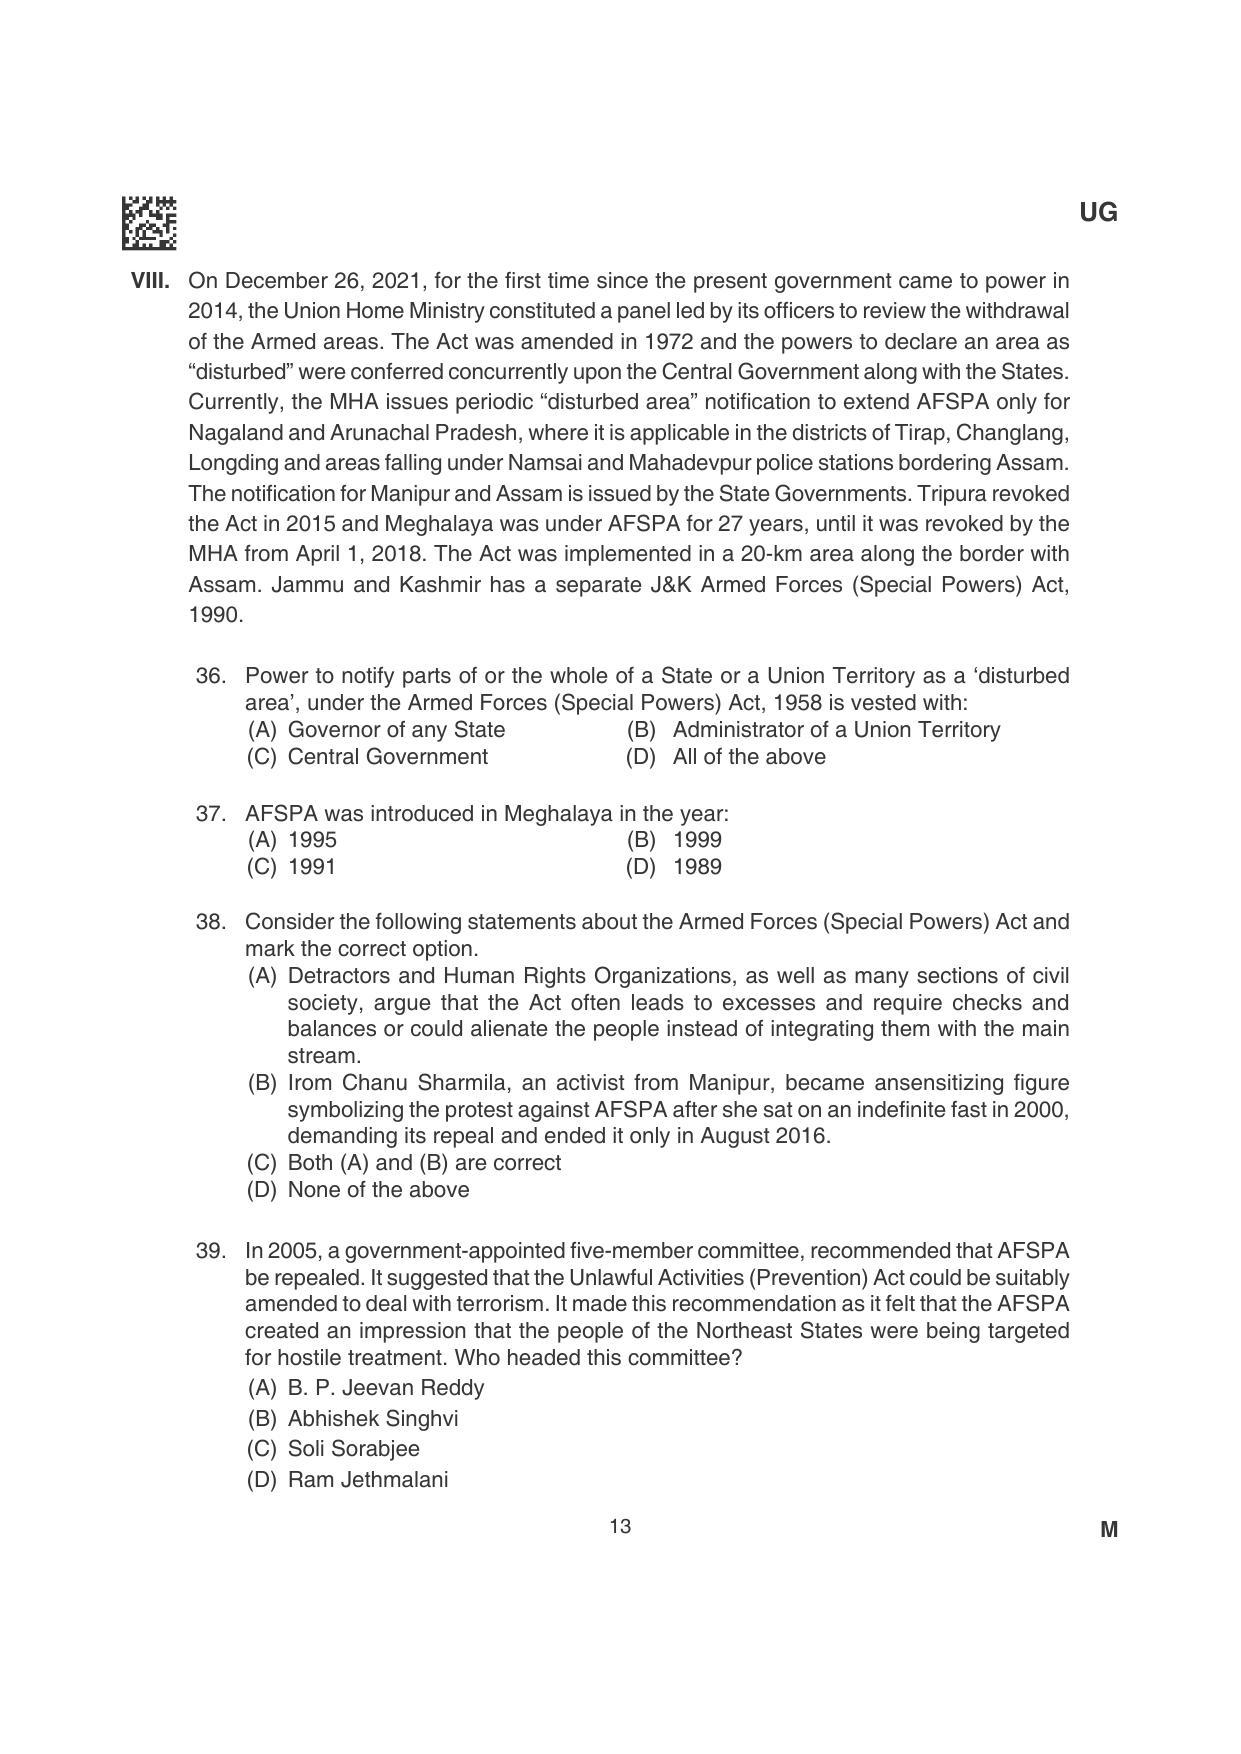 CLAT 2022 UG Question Papers - Page 13